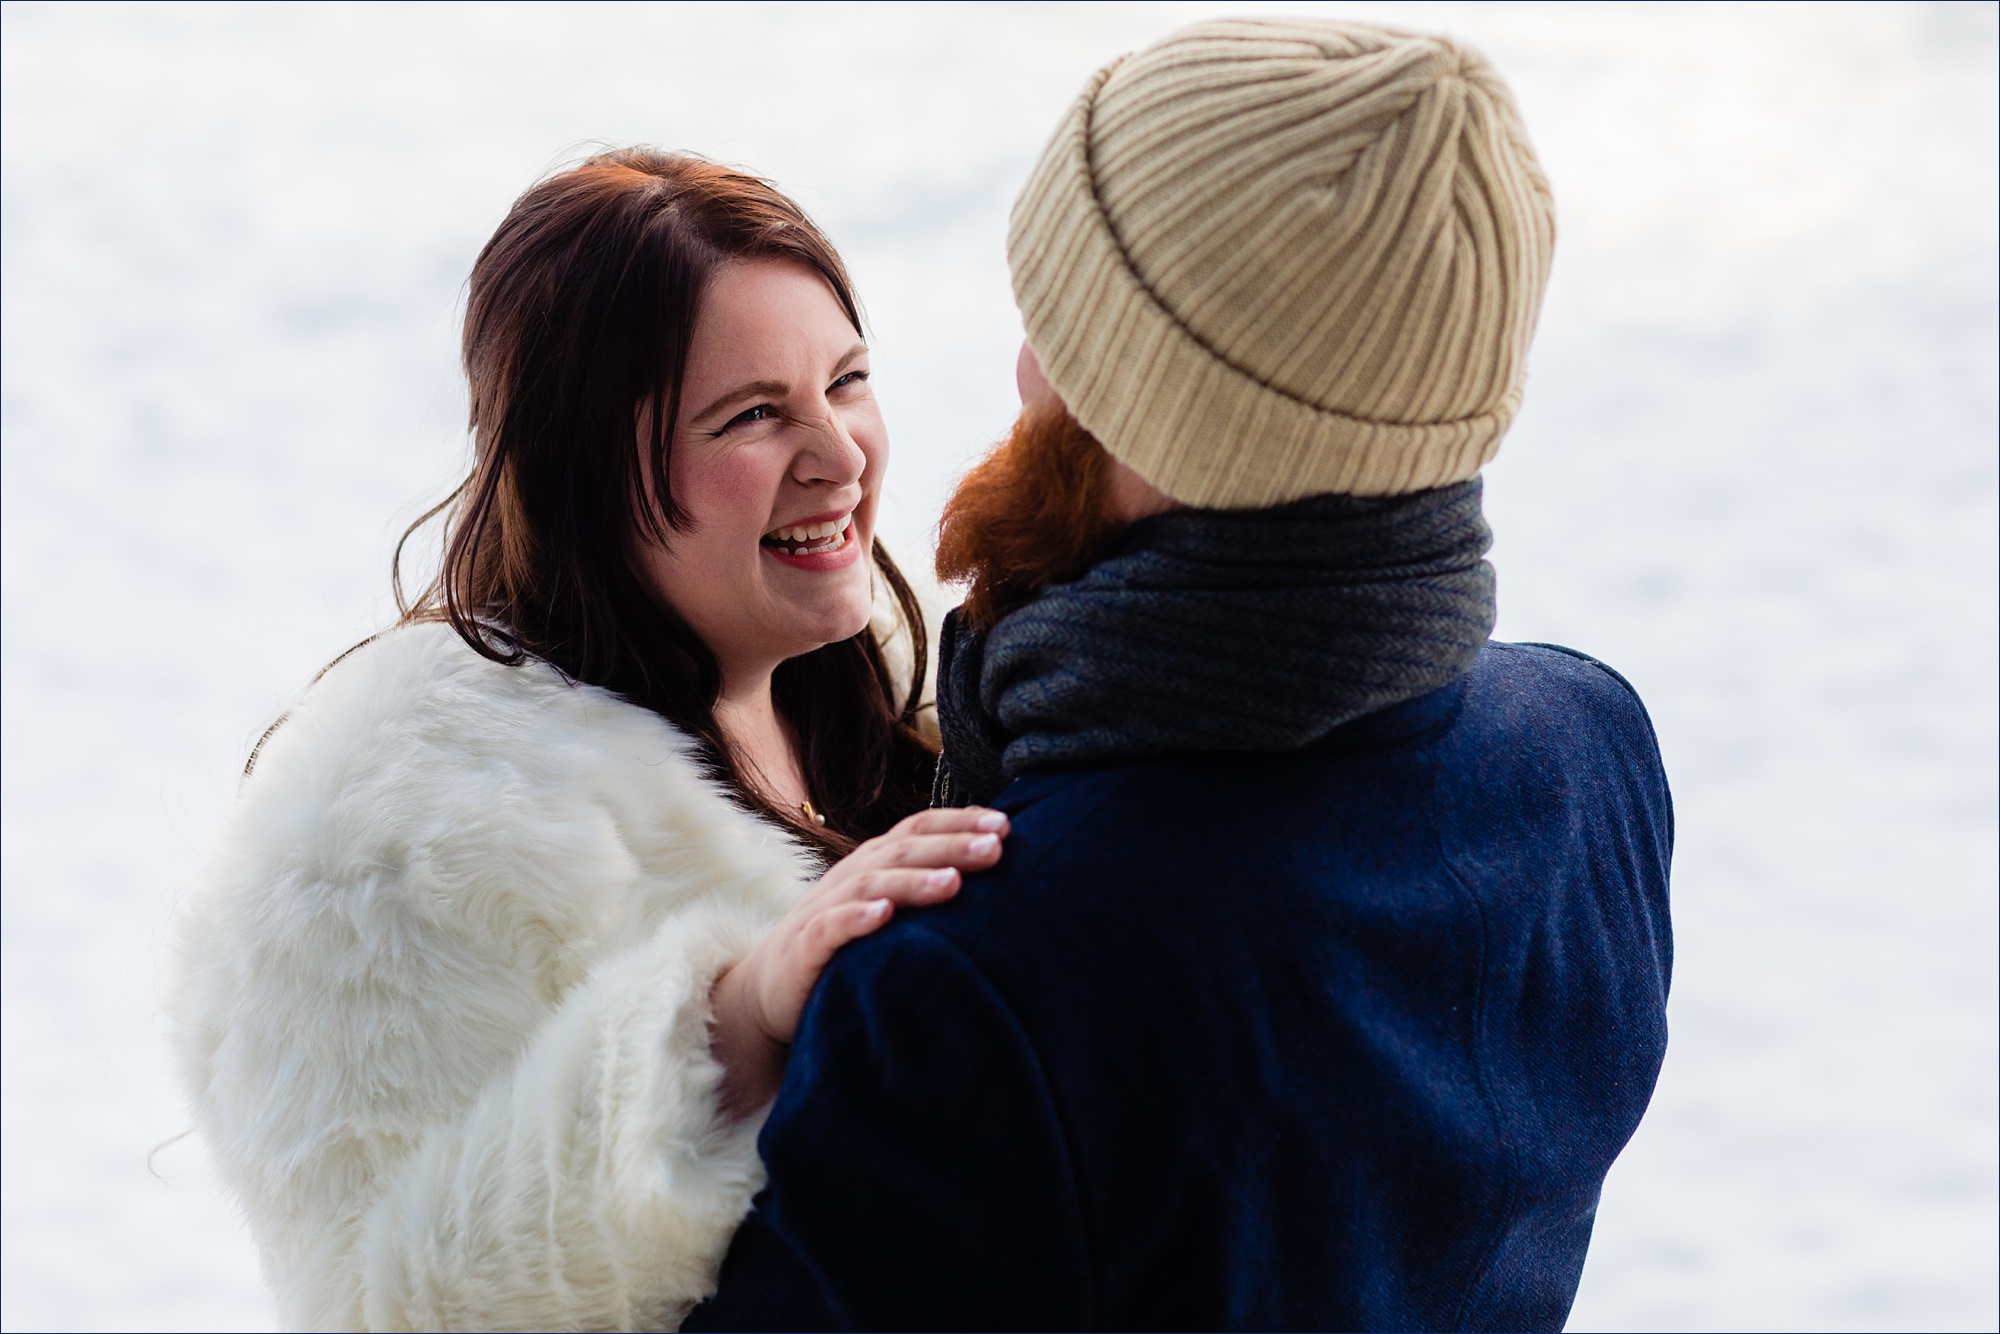 The bride and groom revel in their NH elopement day in winter